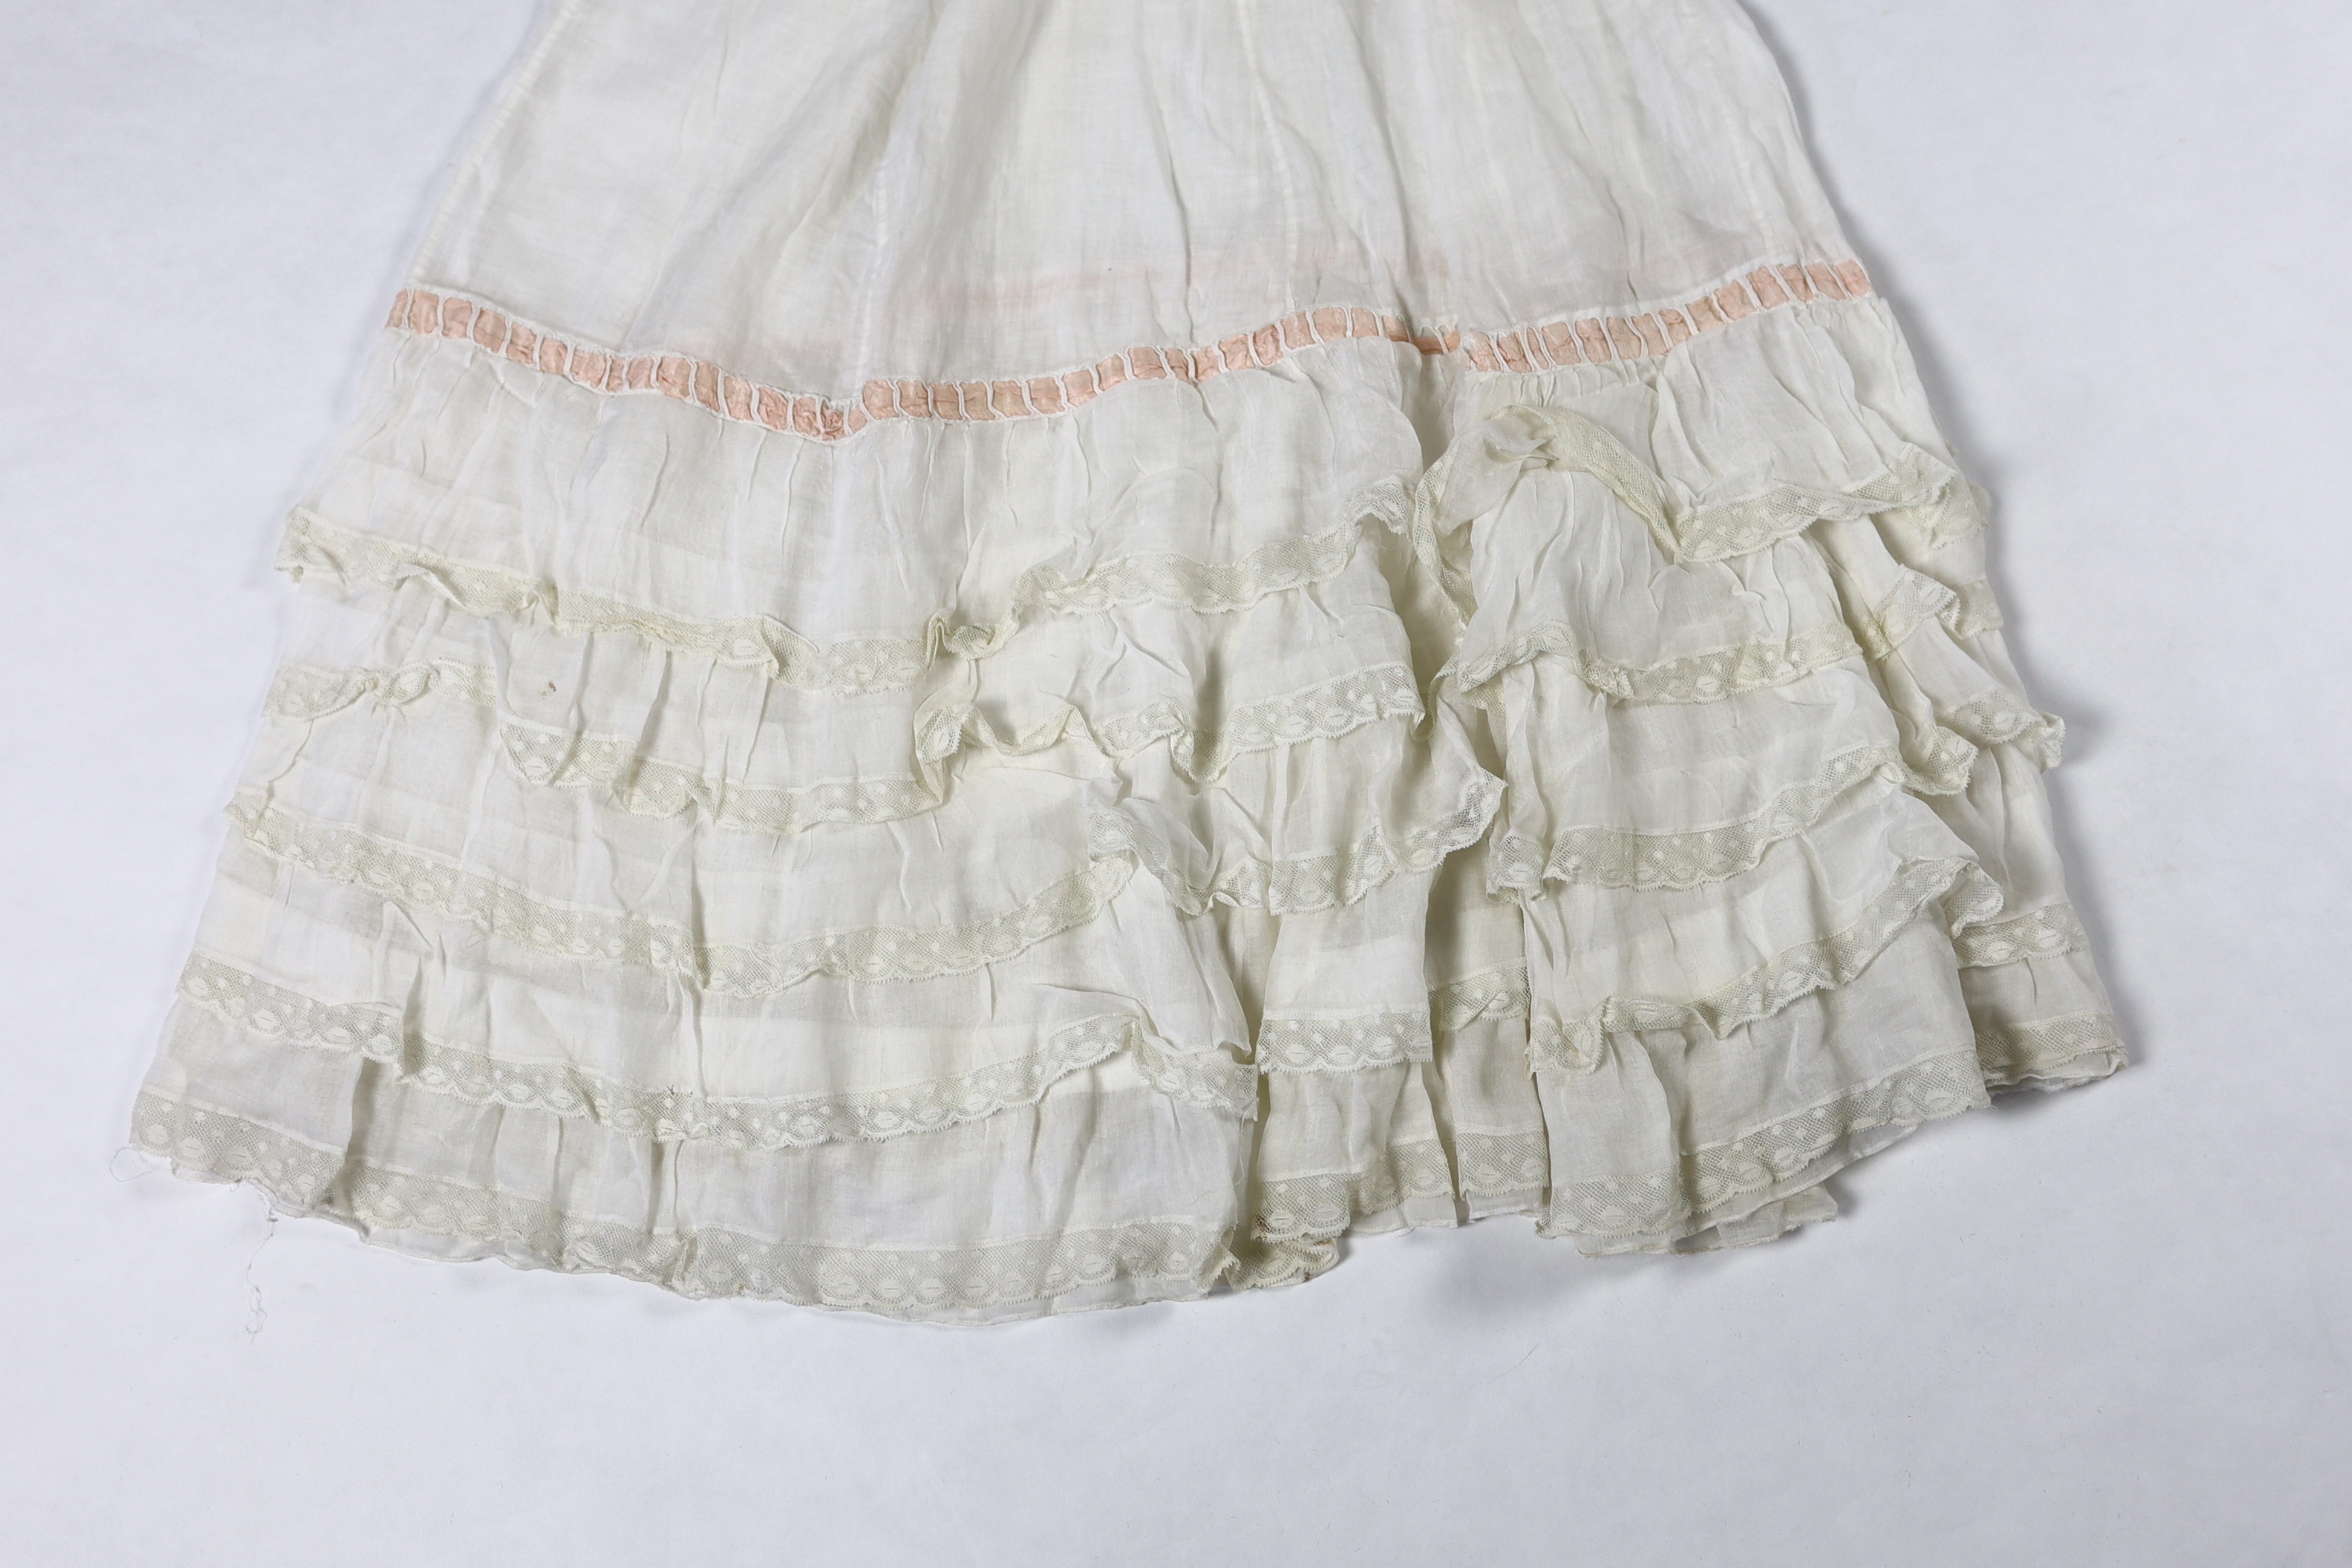 Three Victorian white worked petticoats; one two tiered, one lace trimmed with ribboning, the third worked with cutwork border, all approx. 94cm long